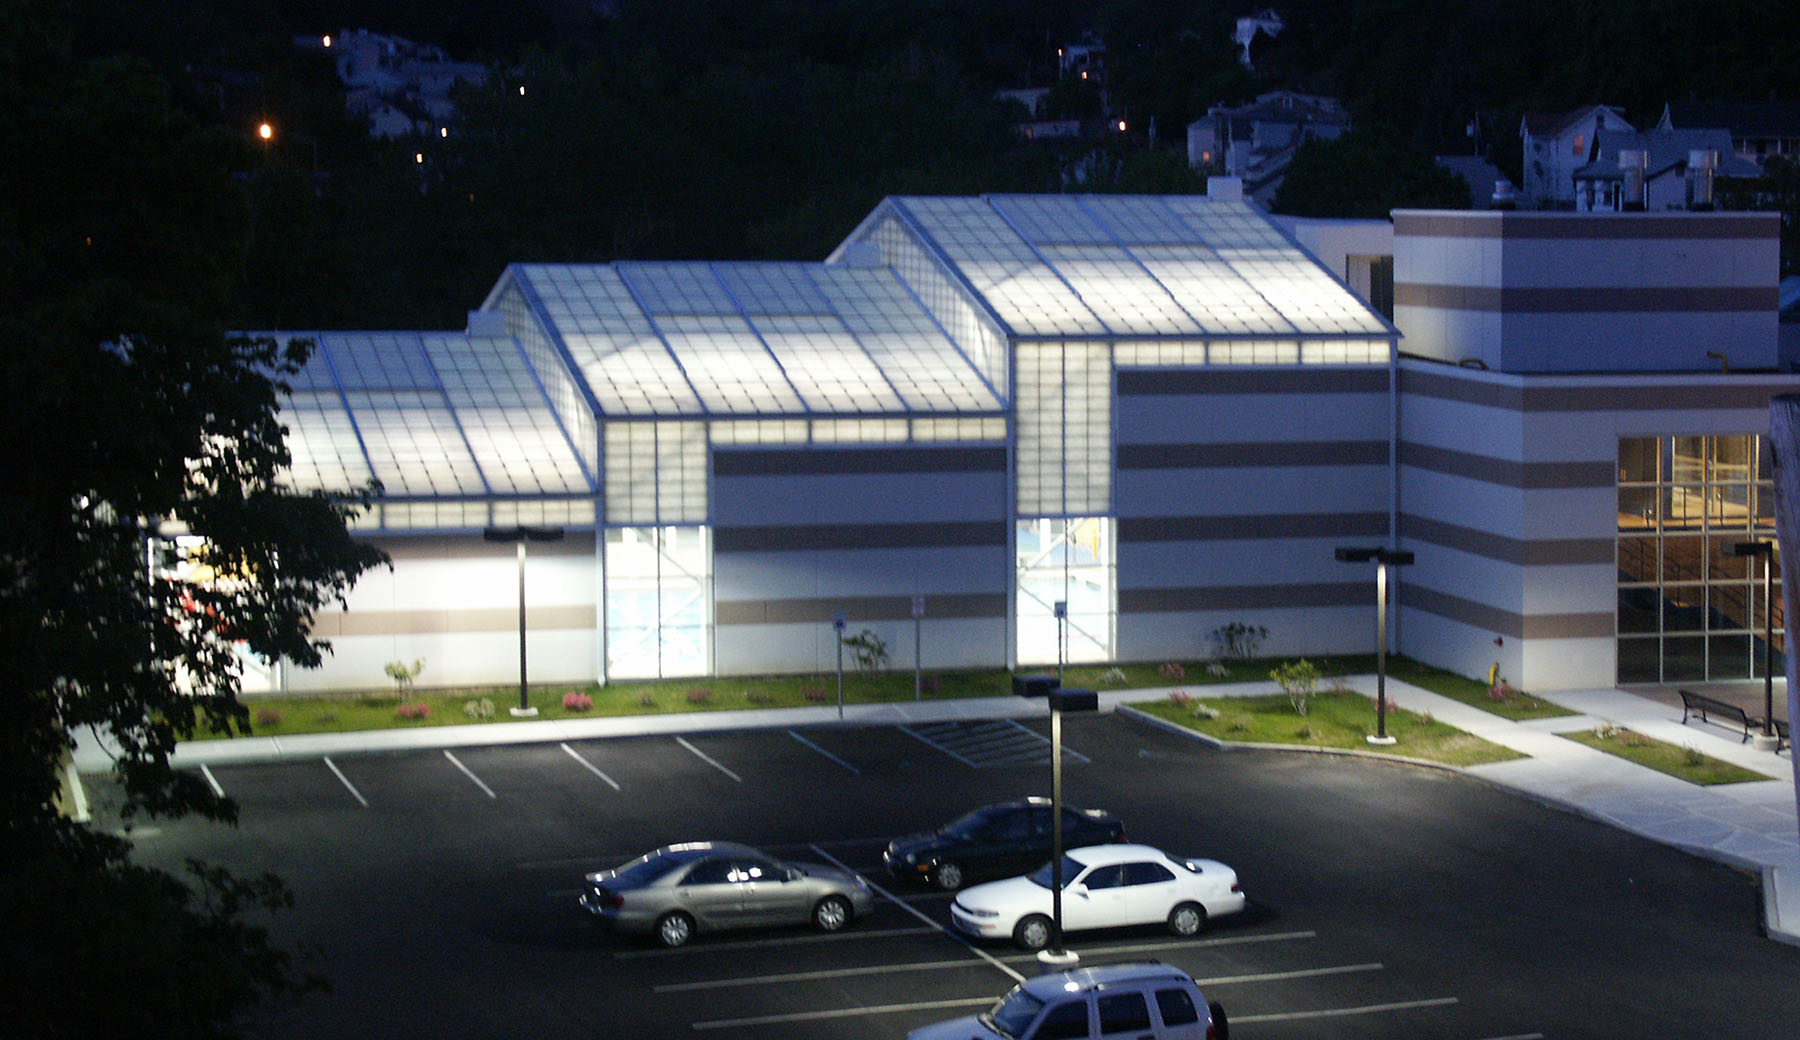 Operable Roof Panels Open to the Sky and Breezes. Translucent Panels Insulate the Natatorium and Glow in the Evening.